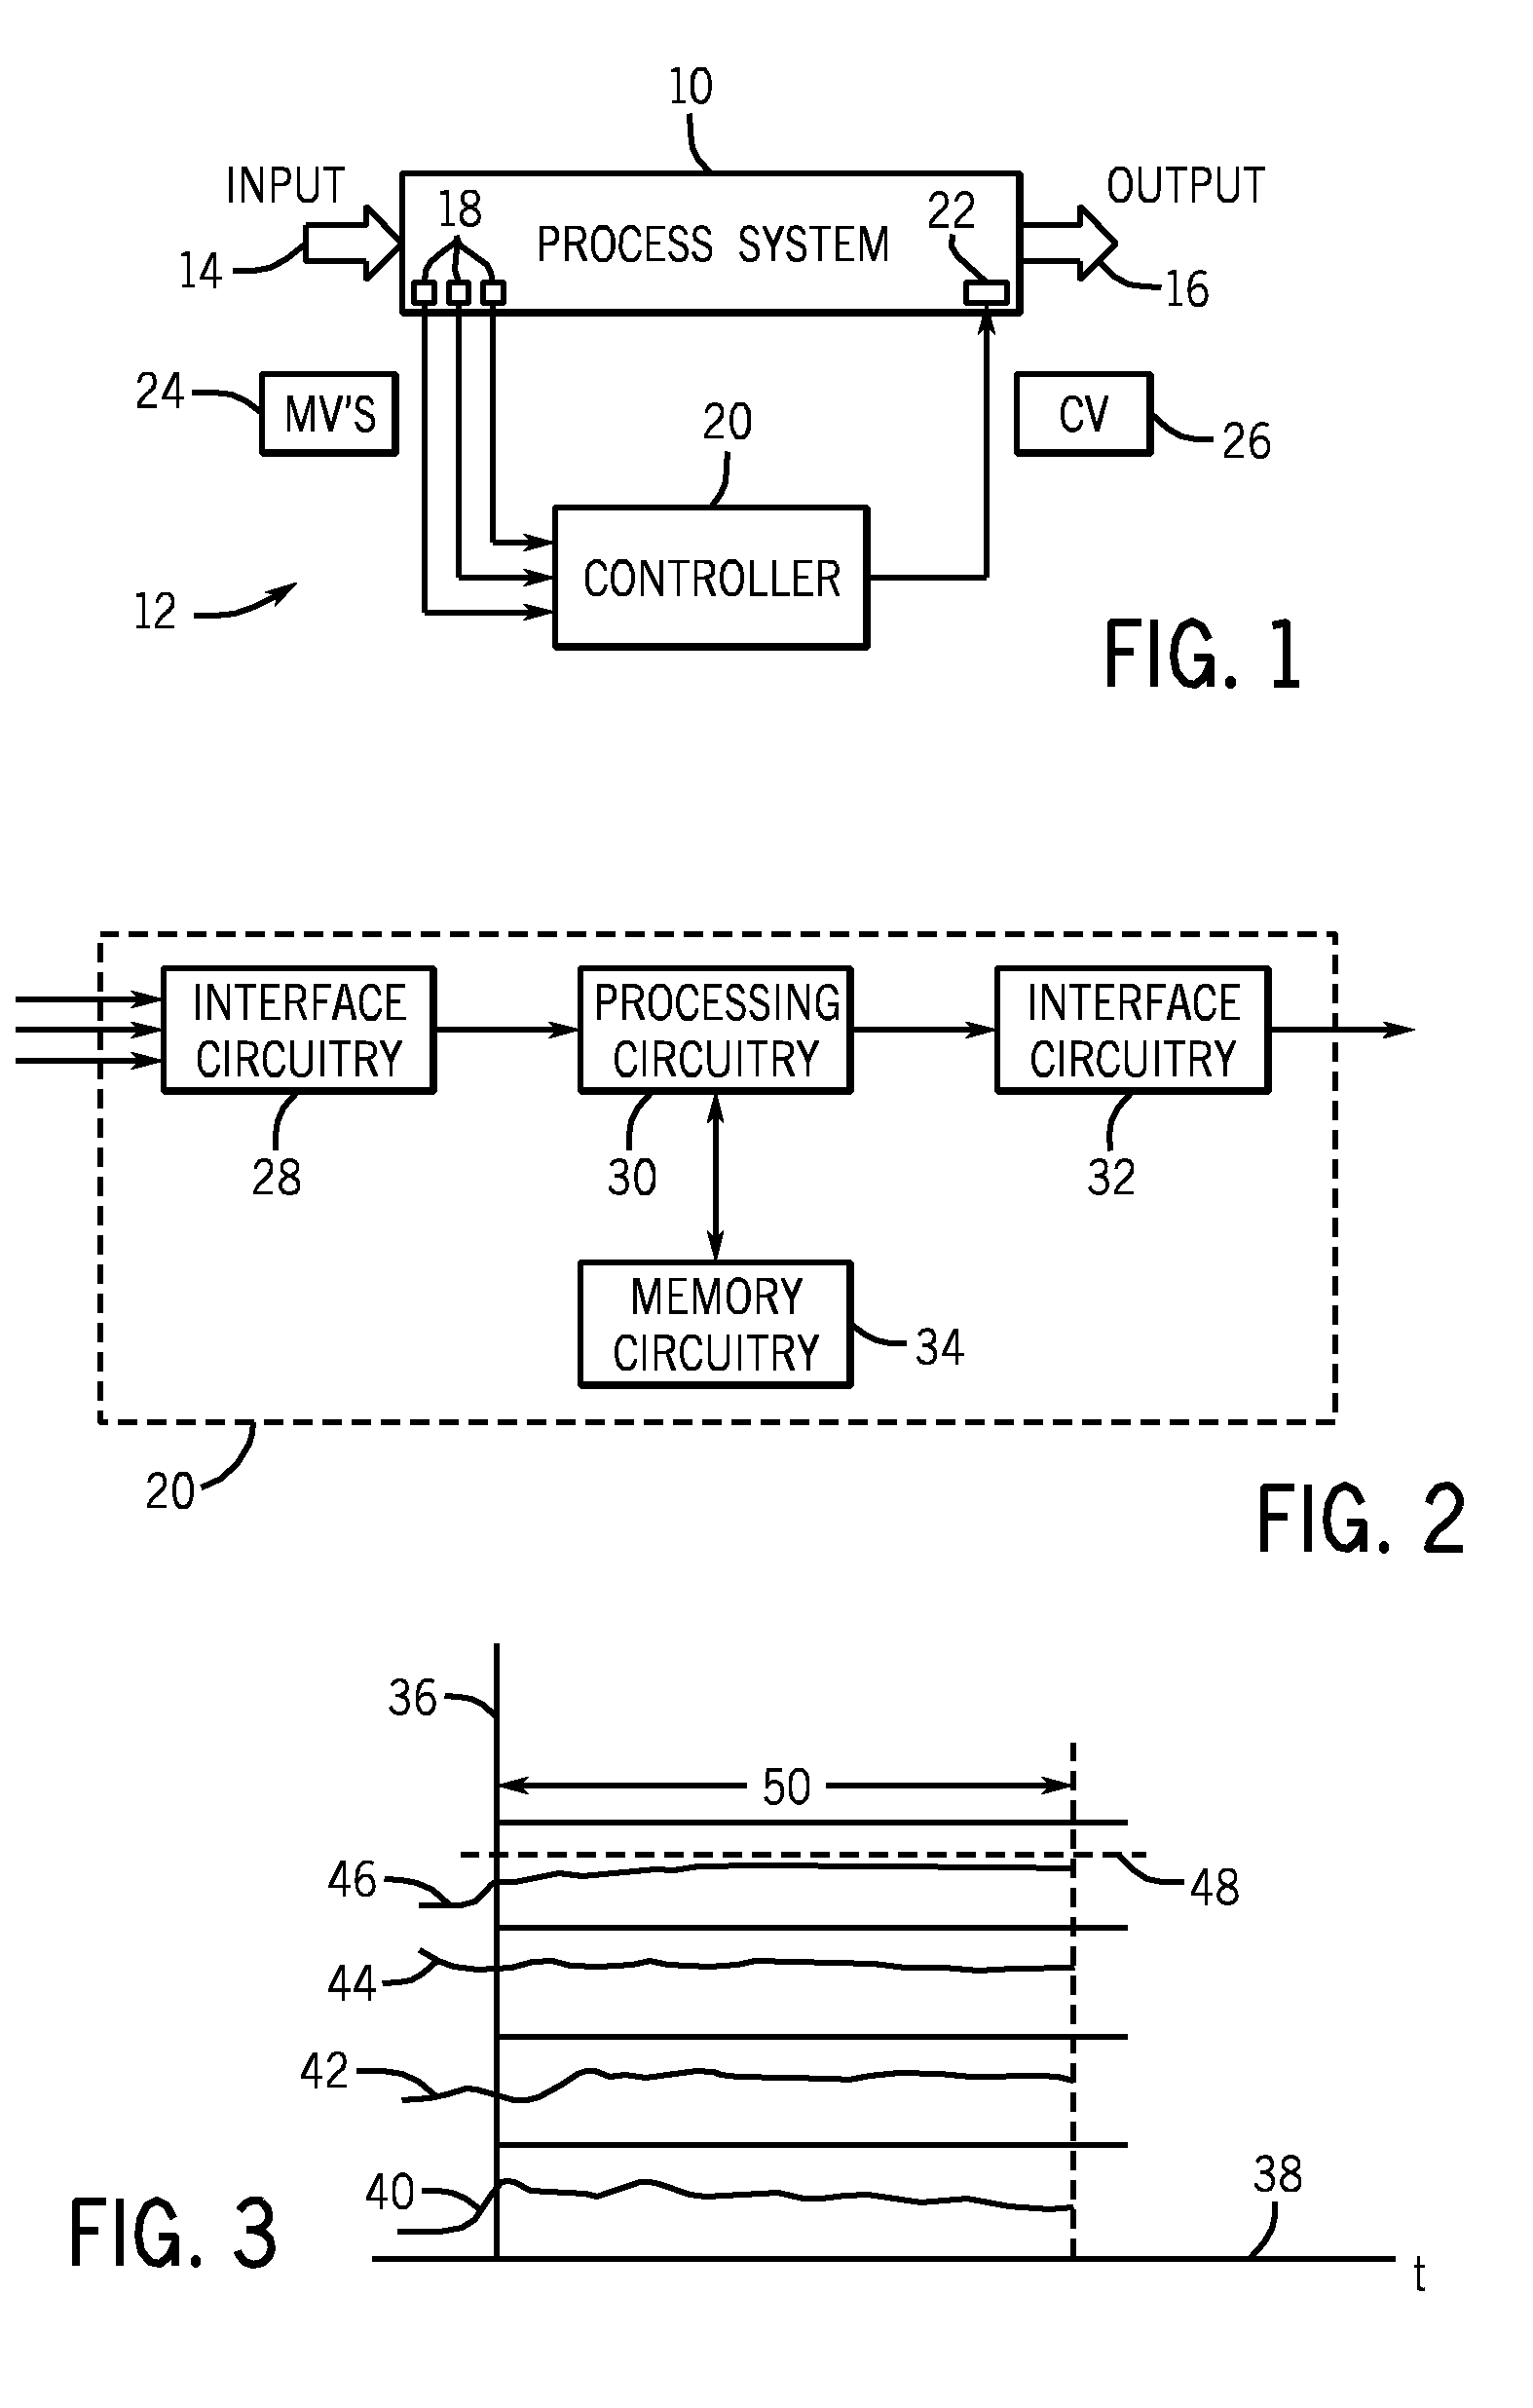 Model Predictive Control System and Method for Reduction of Steady State Error